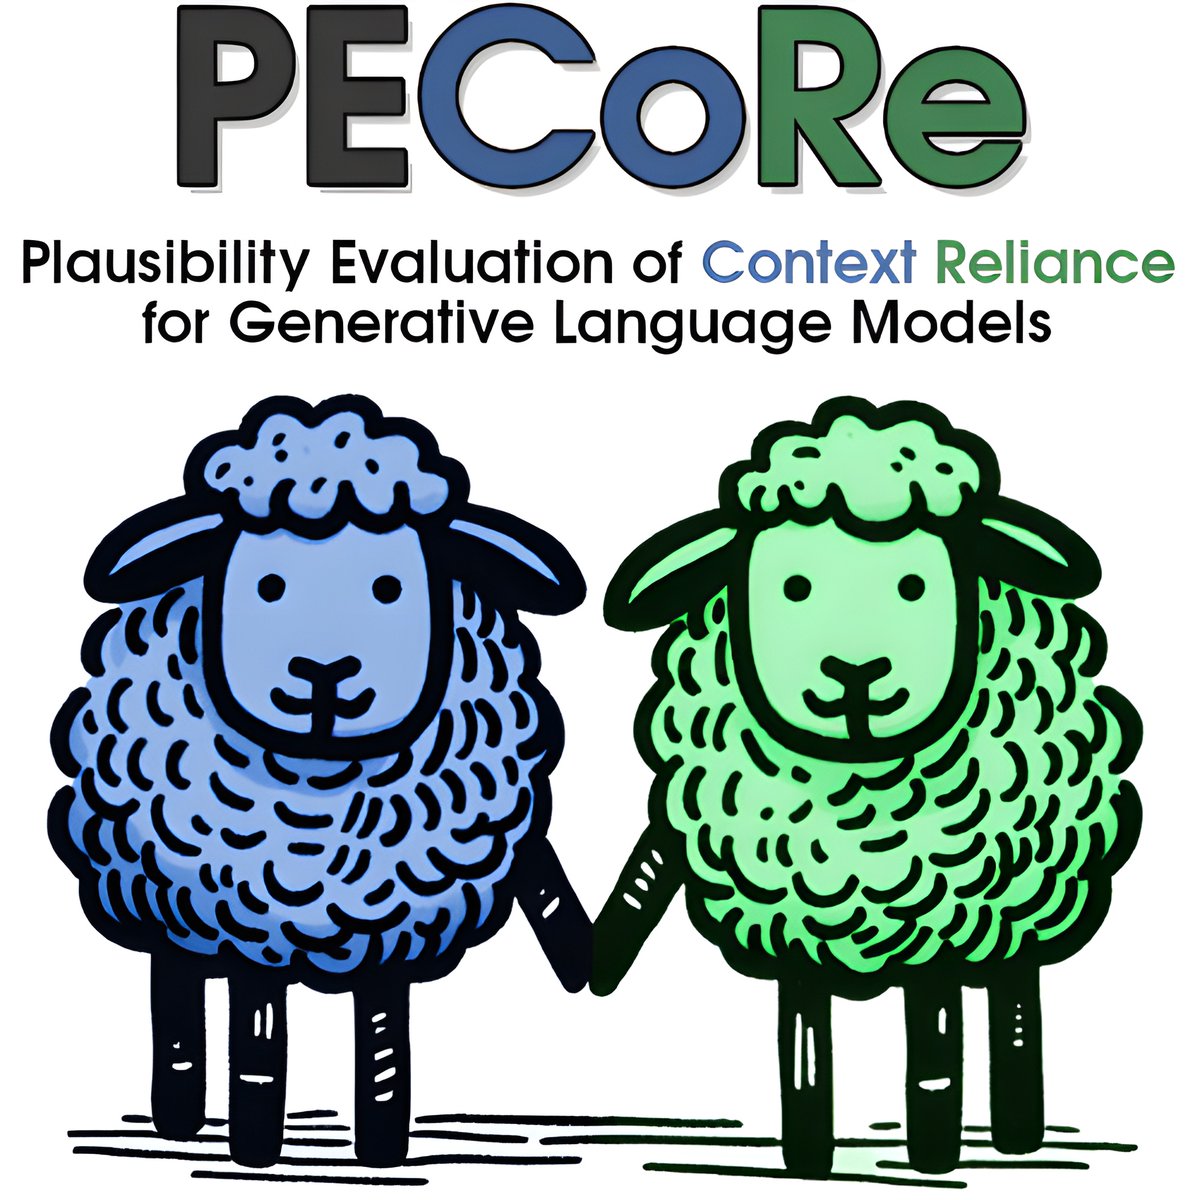 [1/8] Our new work (w/ @AriannaBisazza @gchrupala @MalvinaNissim) is finally out! 🎉 We introduce PECoRe, an interpretability framework using model internals to identify & attribute context dependence in language models. 📄Paper: arxiv.org/abs/2310.01188 #NLProc #neuralempty